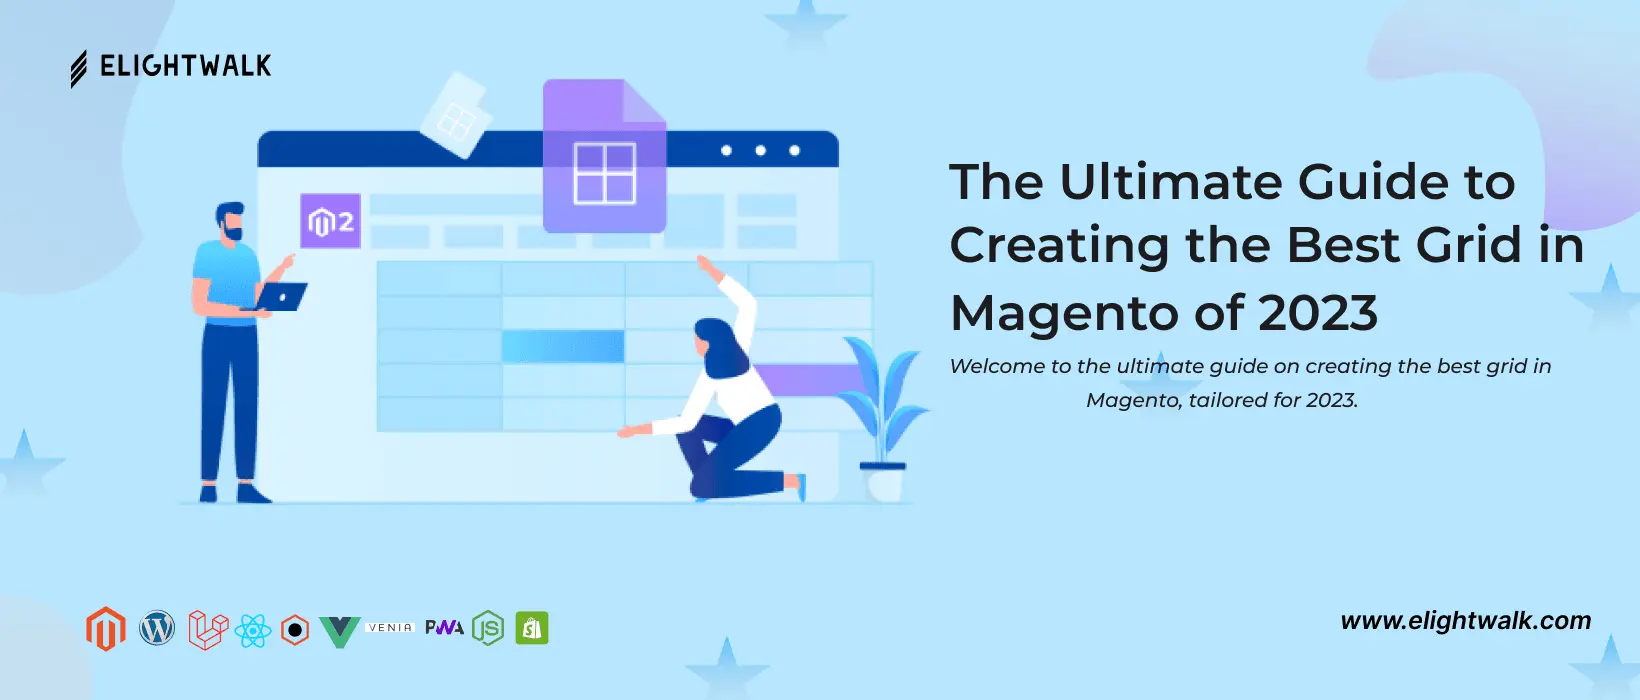 The Ultimate Guide to Creating the Best Grid in Magento of 2023